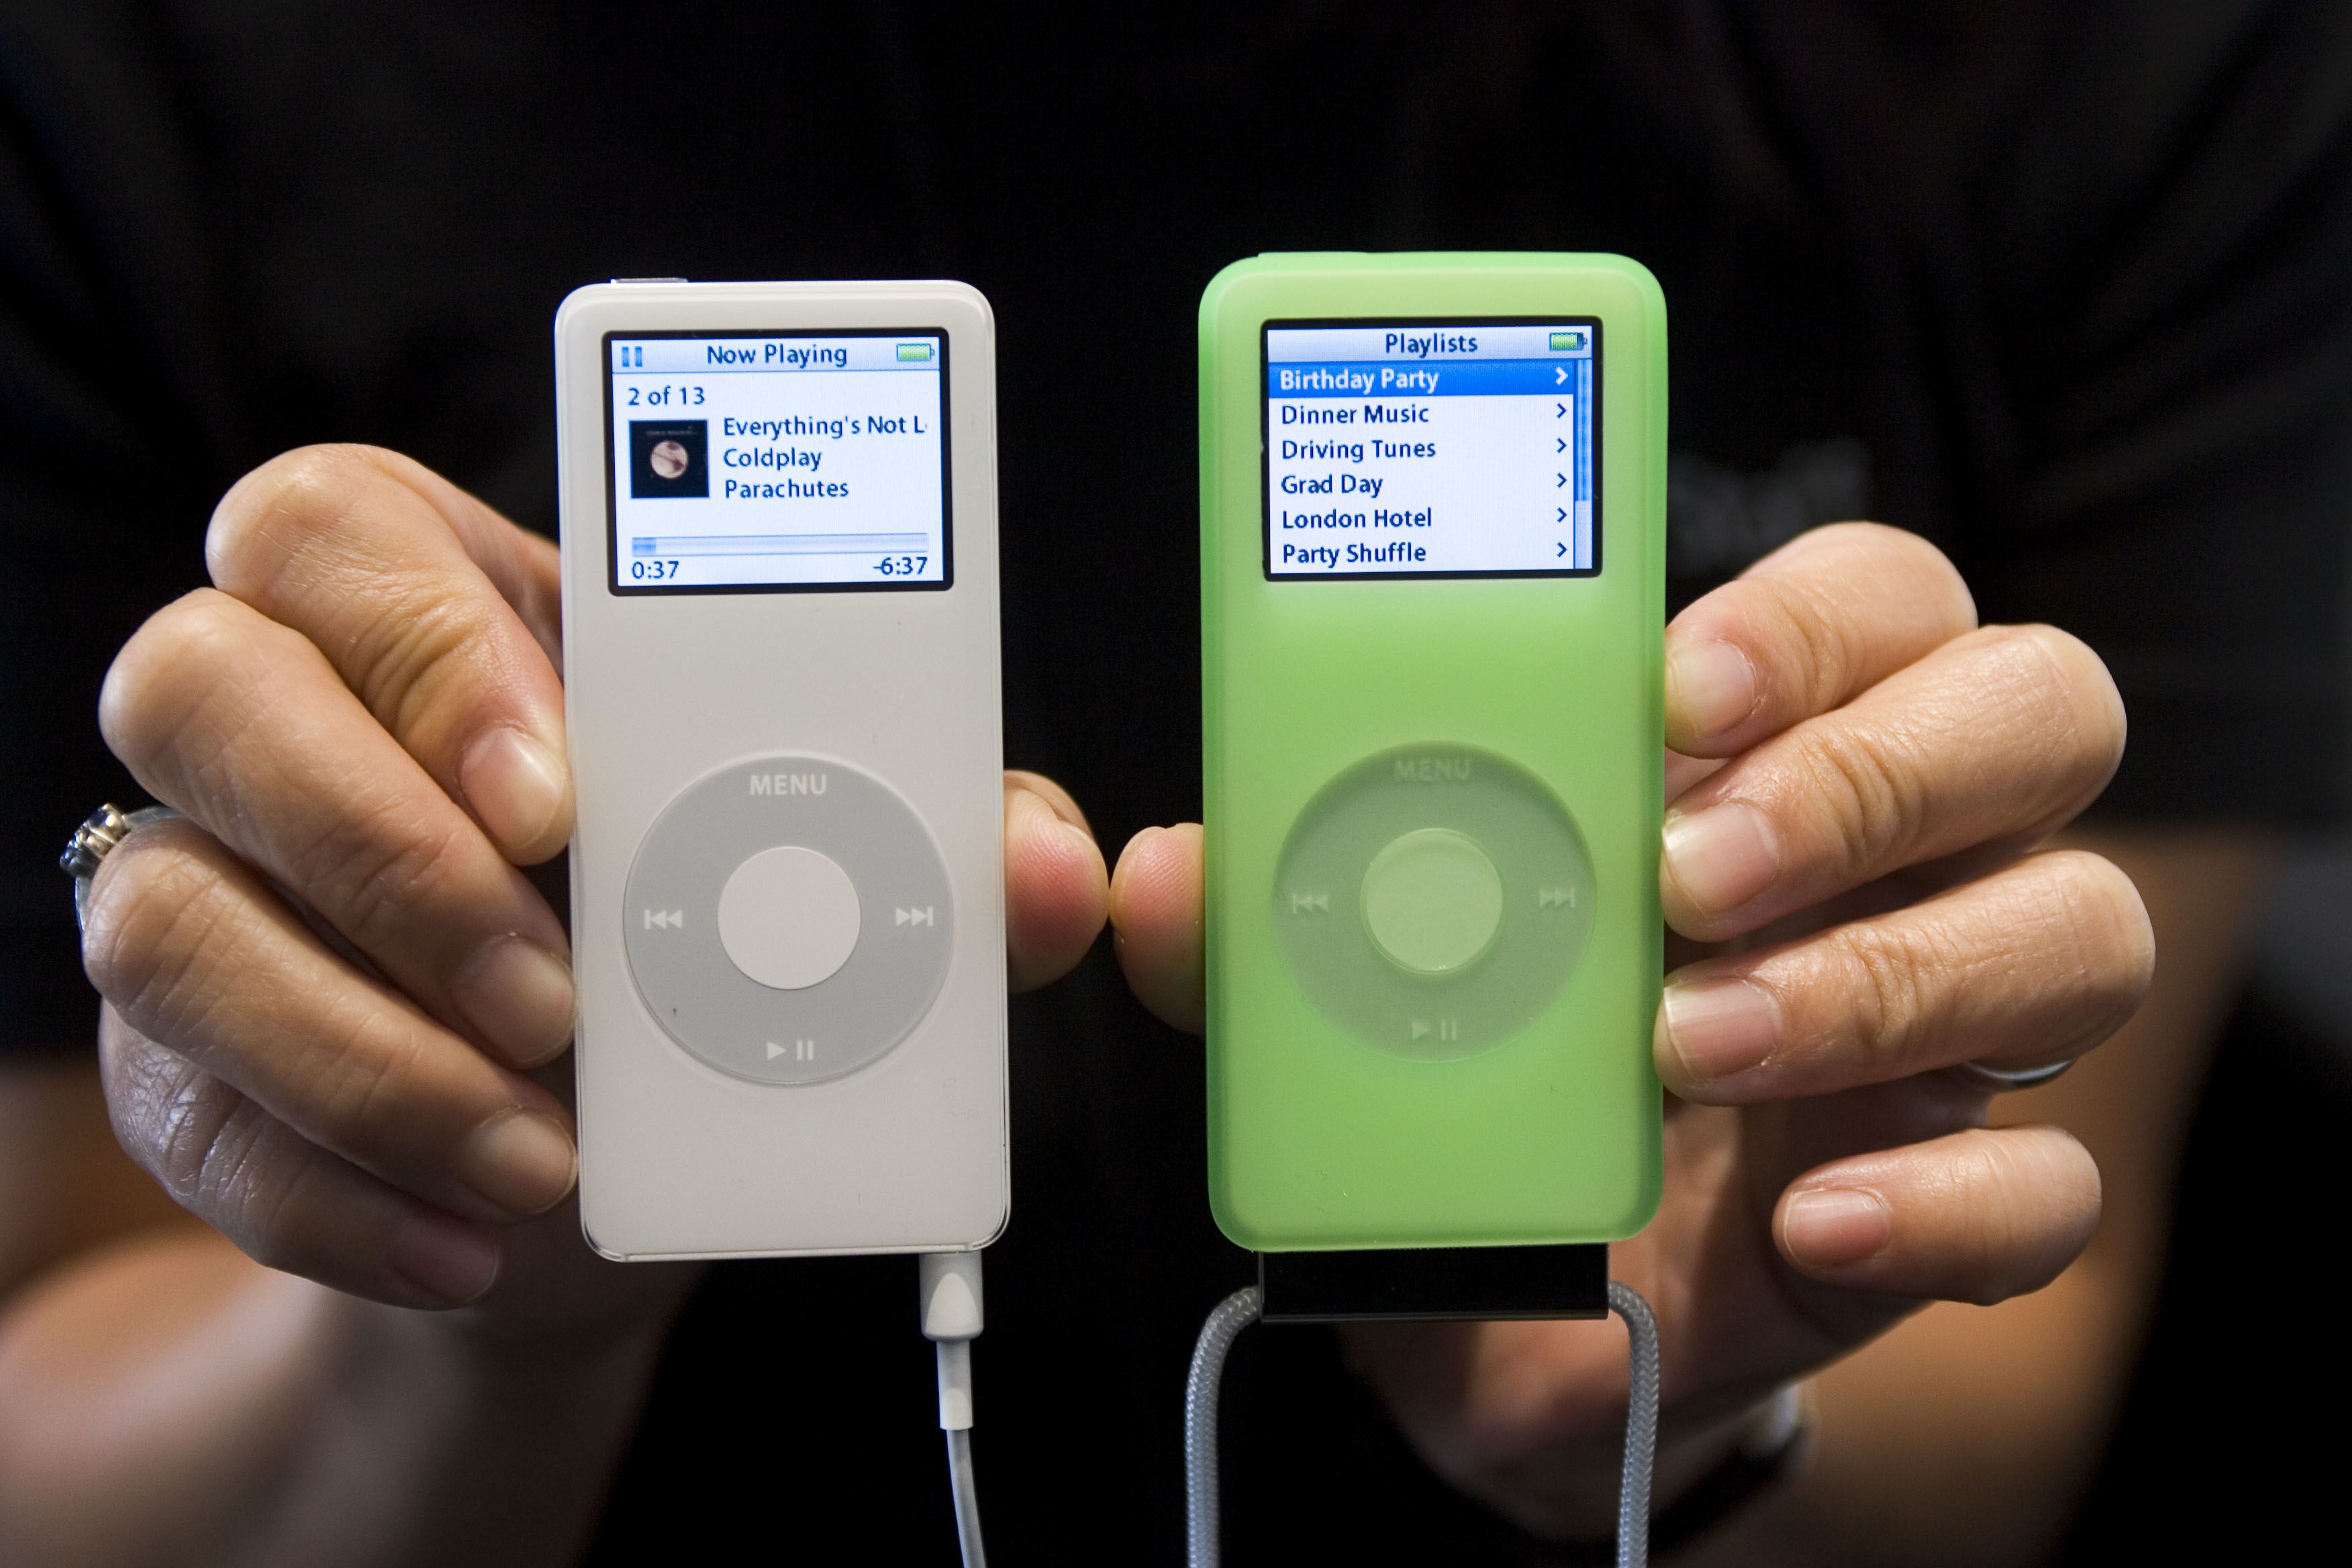 Download Songs From Mac To Ipod Touch